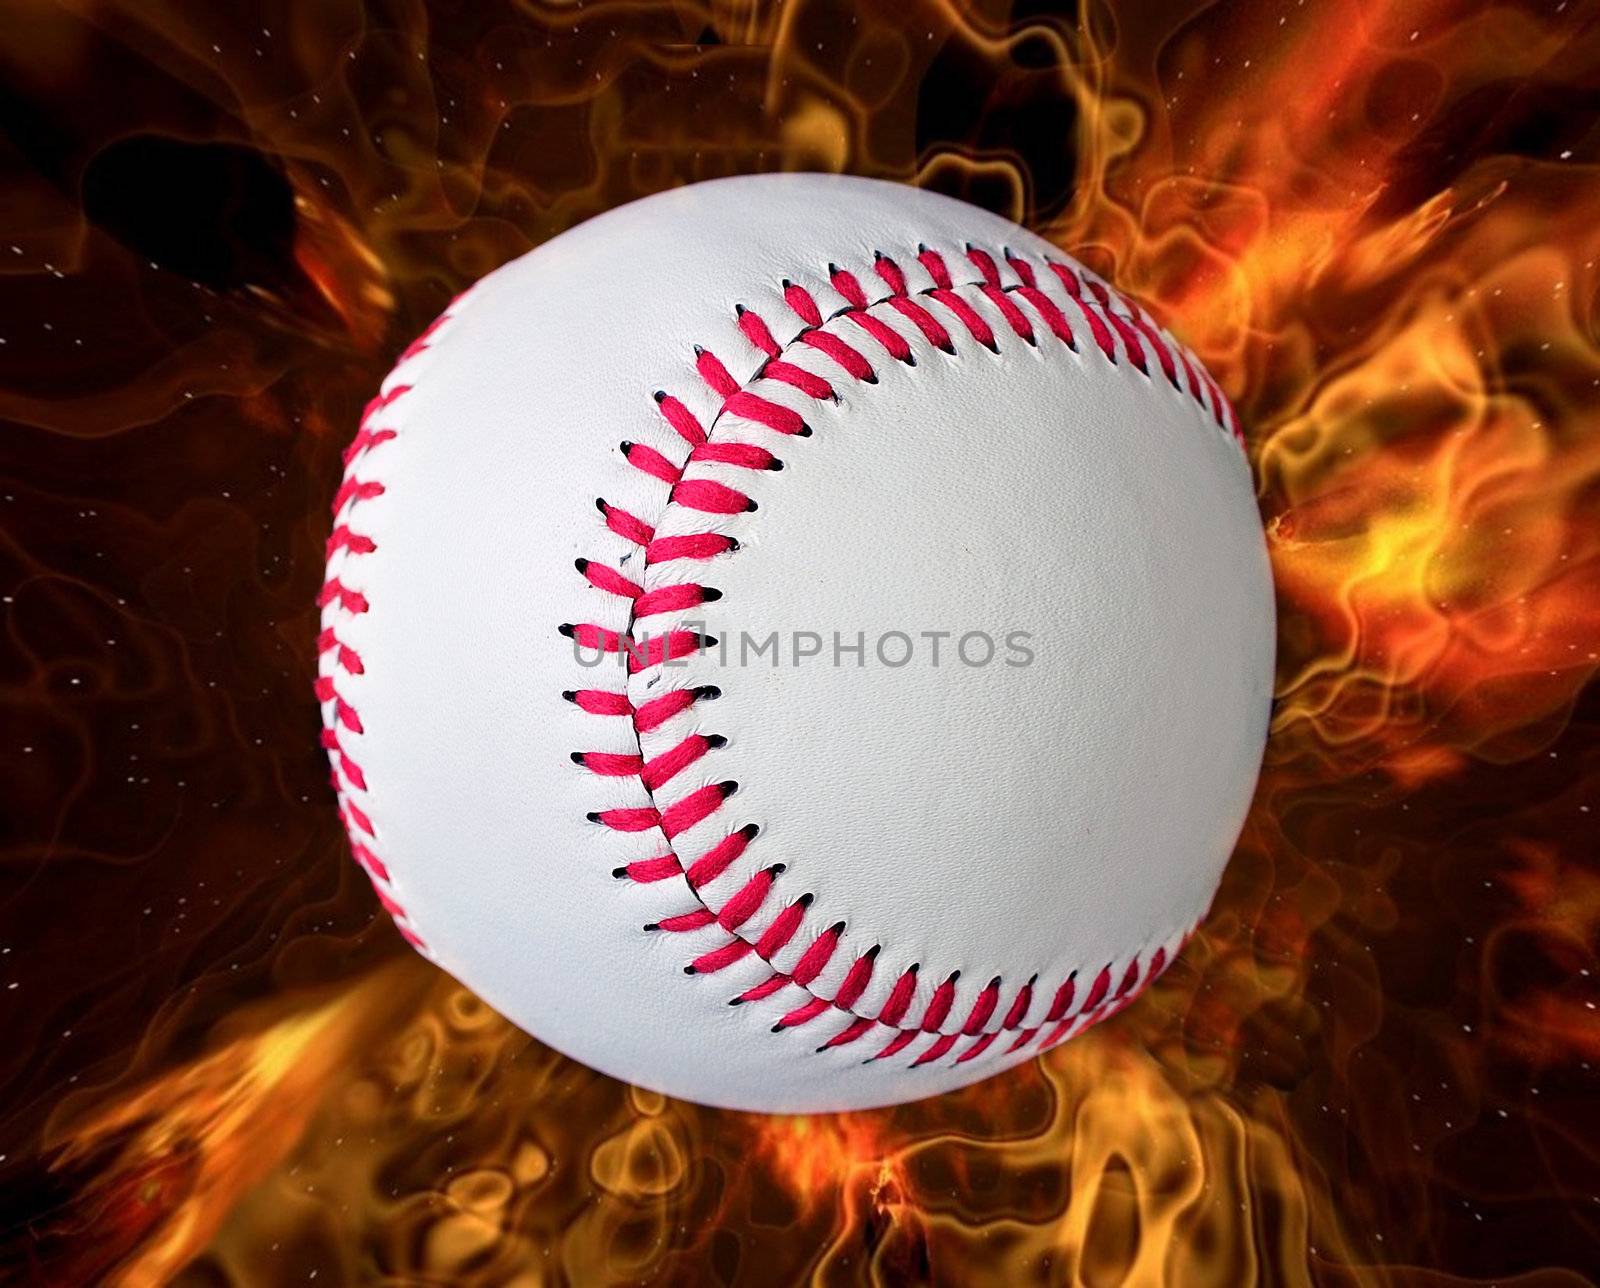 Baseball at high speed coming out of explosion fire